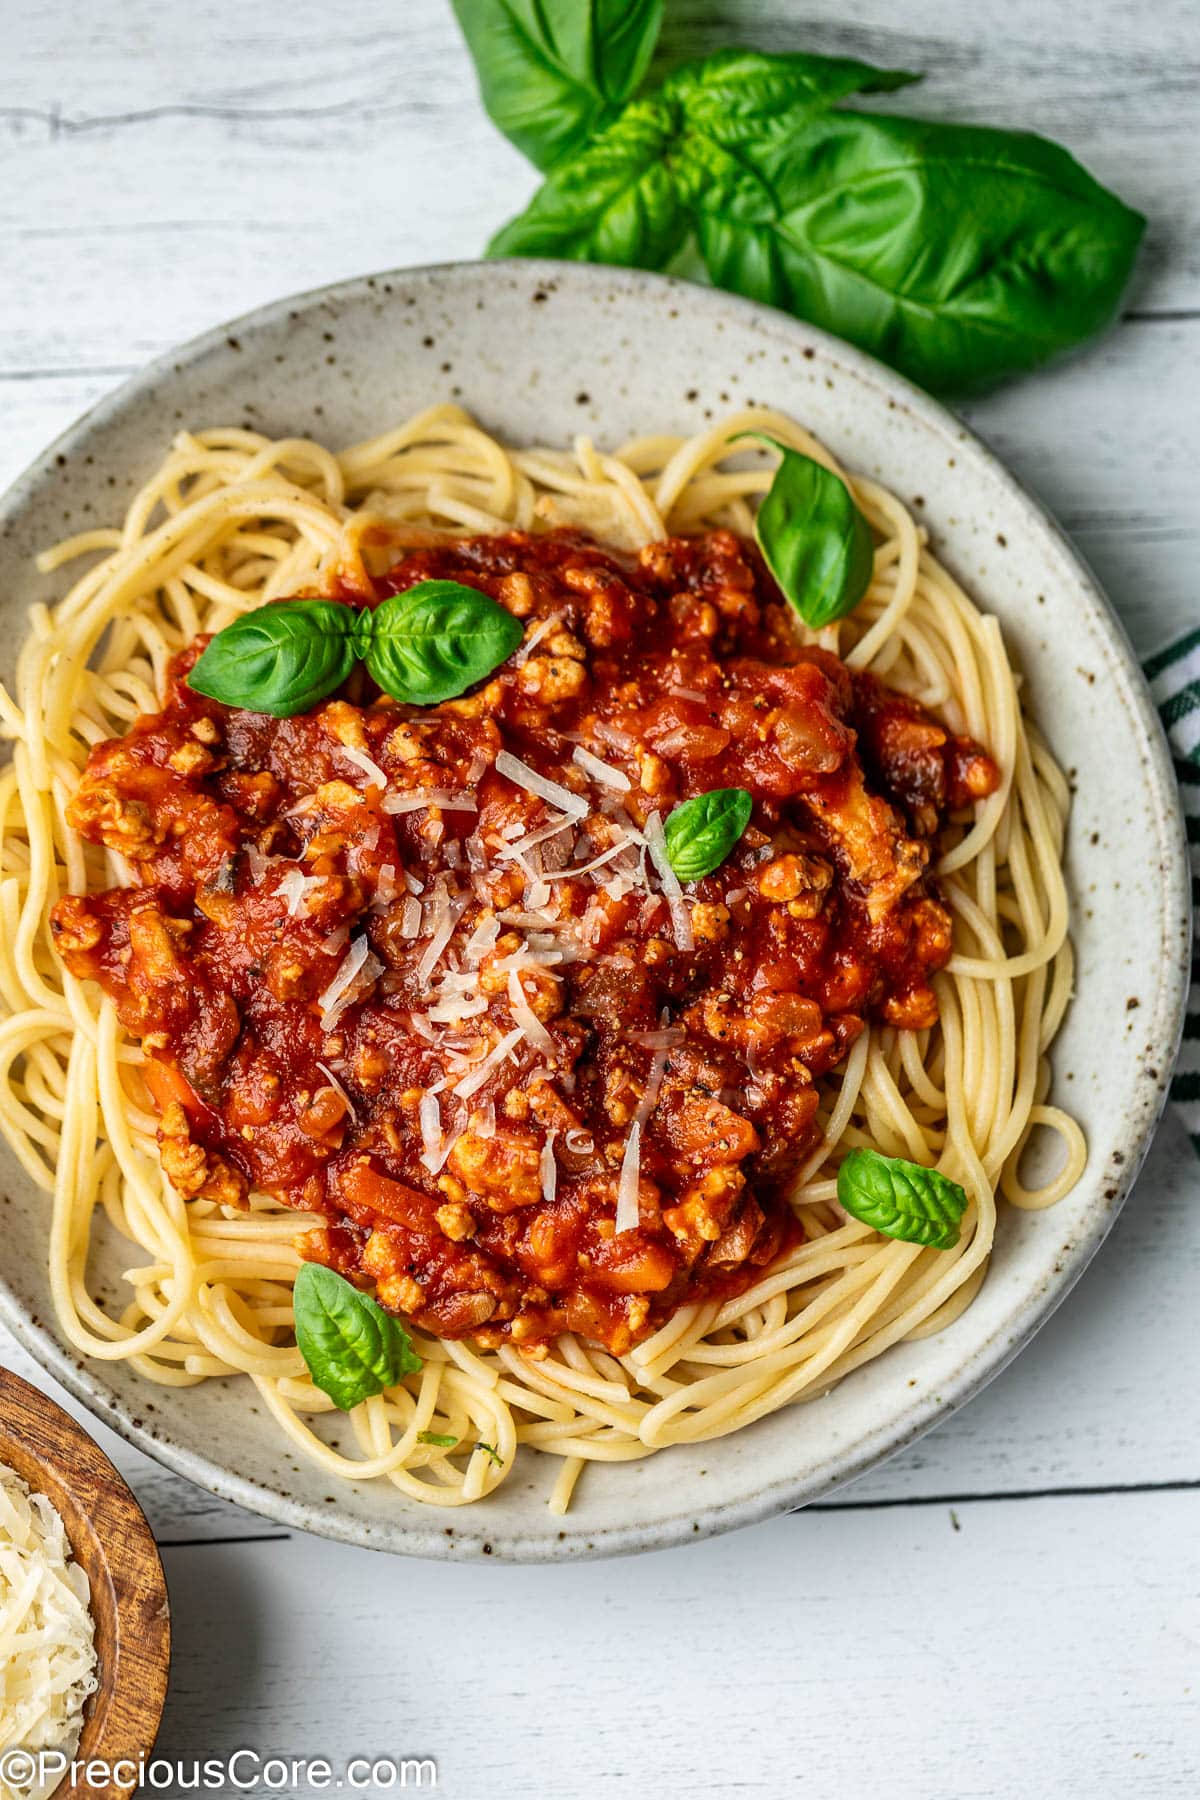 A bowl of spaghetti topped with red sauce, parmesan, and basil leaves.